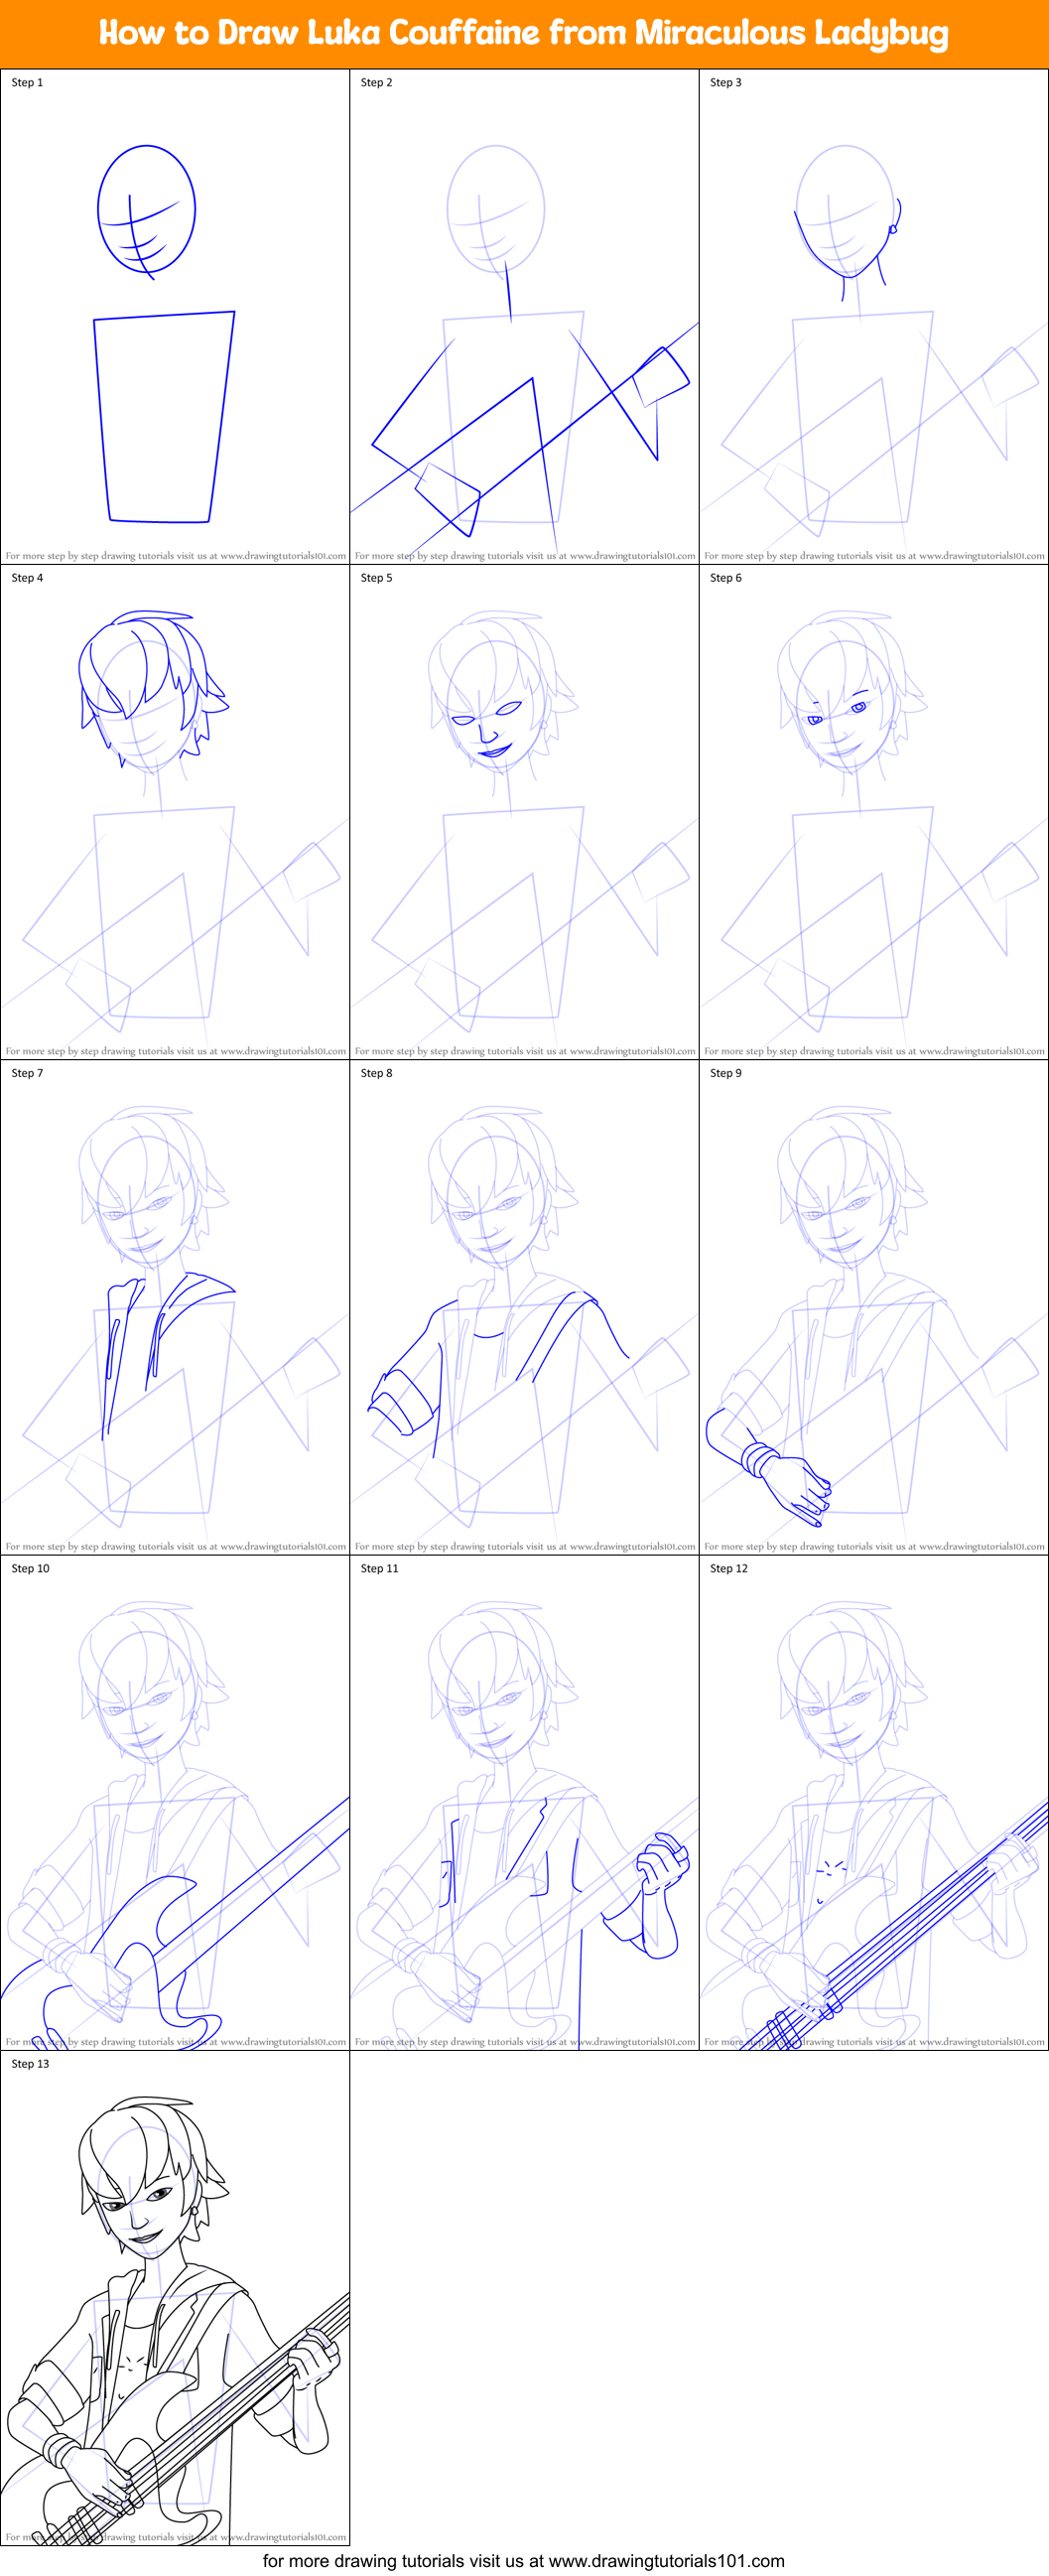 Download How to Draw Luka Couffaine from Miraculous Ladybug printable step by step drawing sheet ...